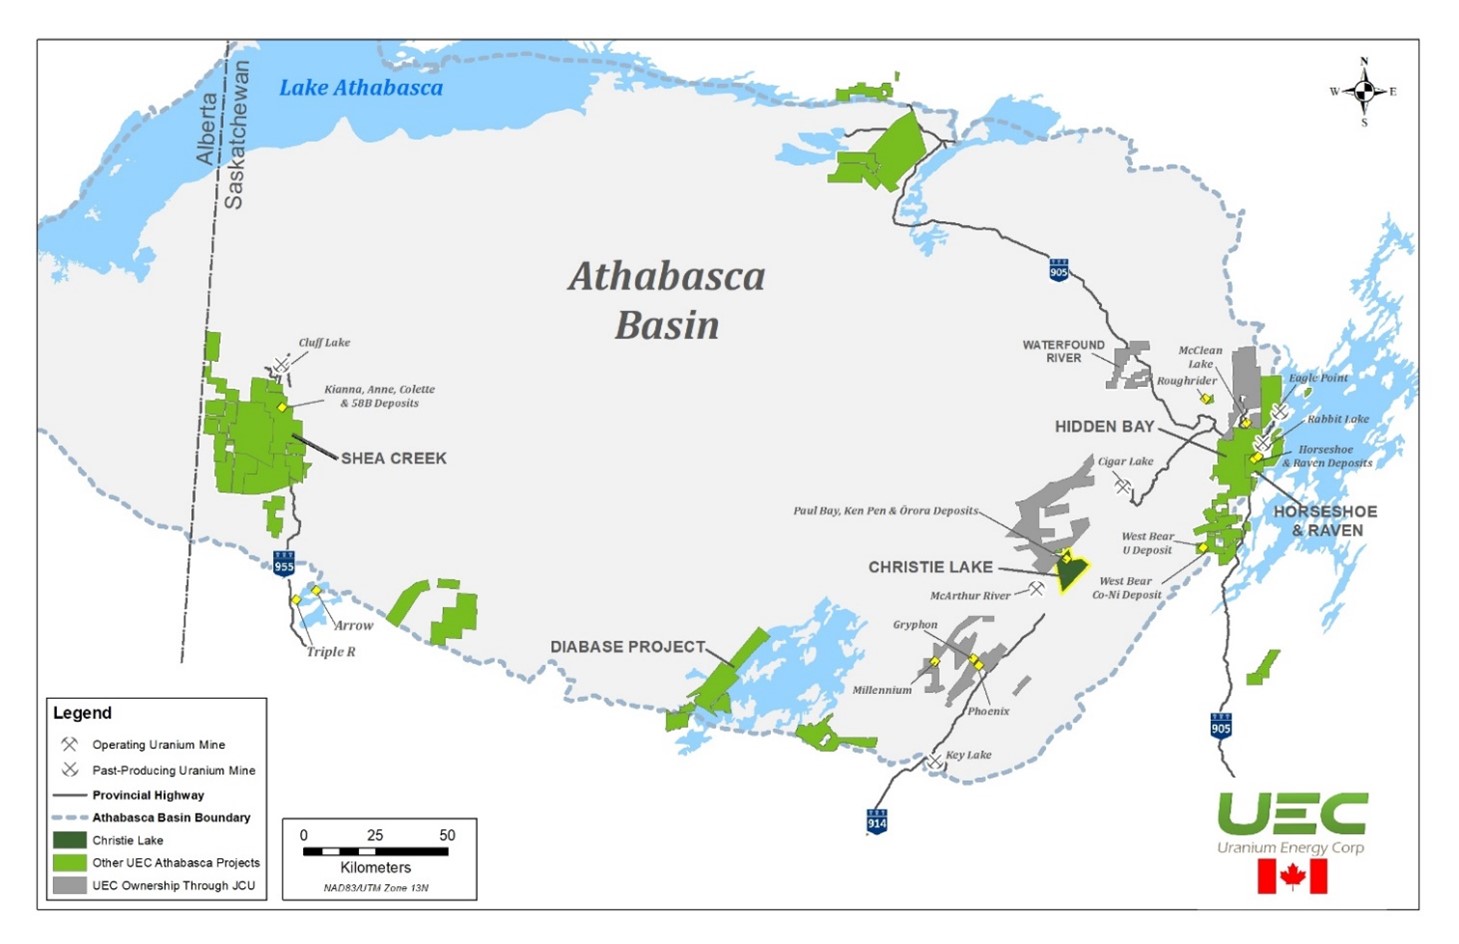 UEC's Athabasca Basin Projects